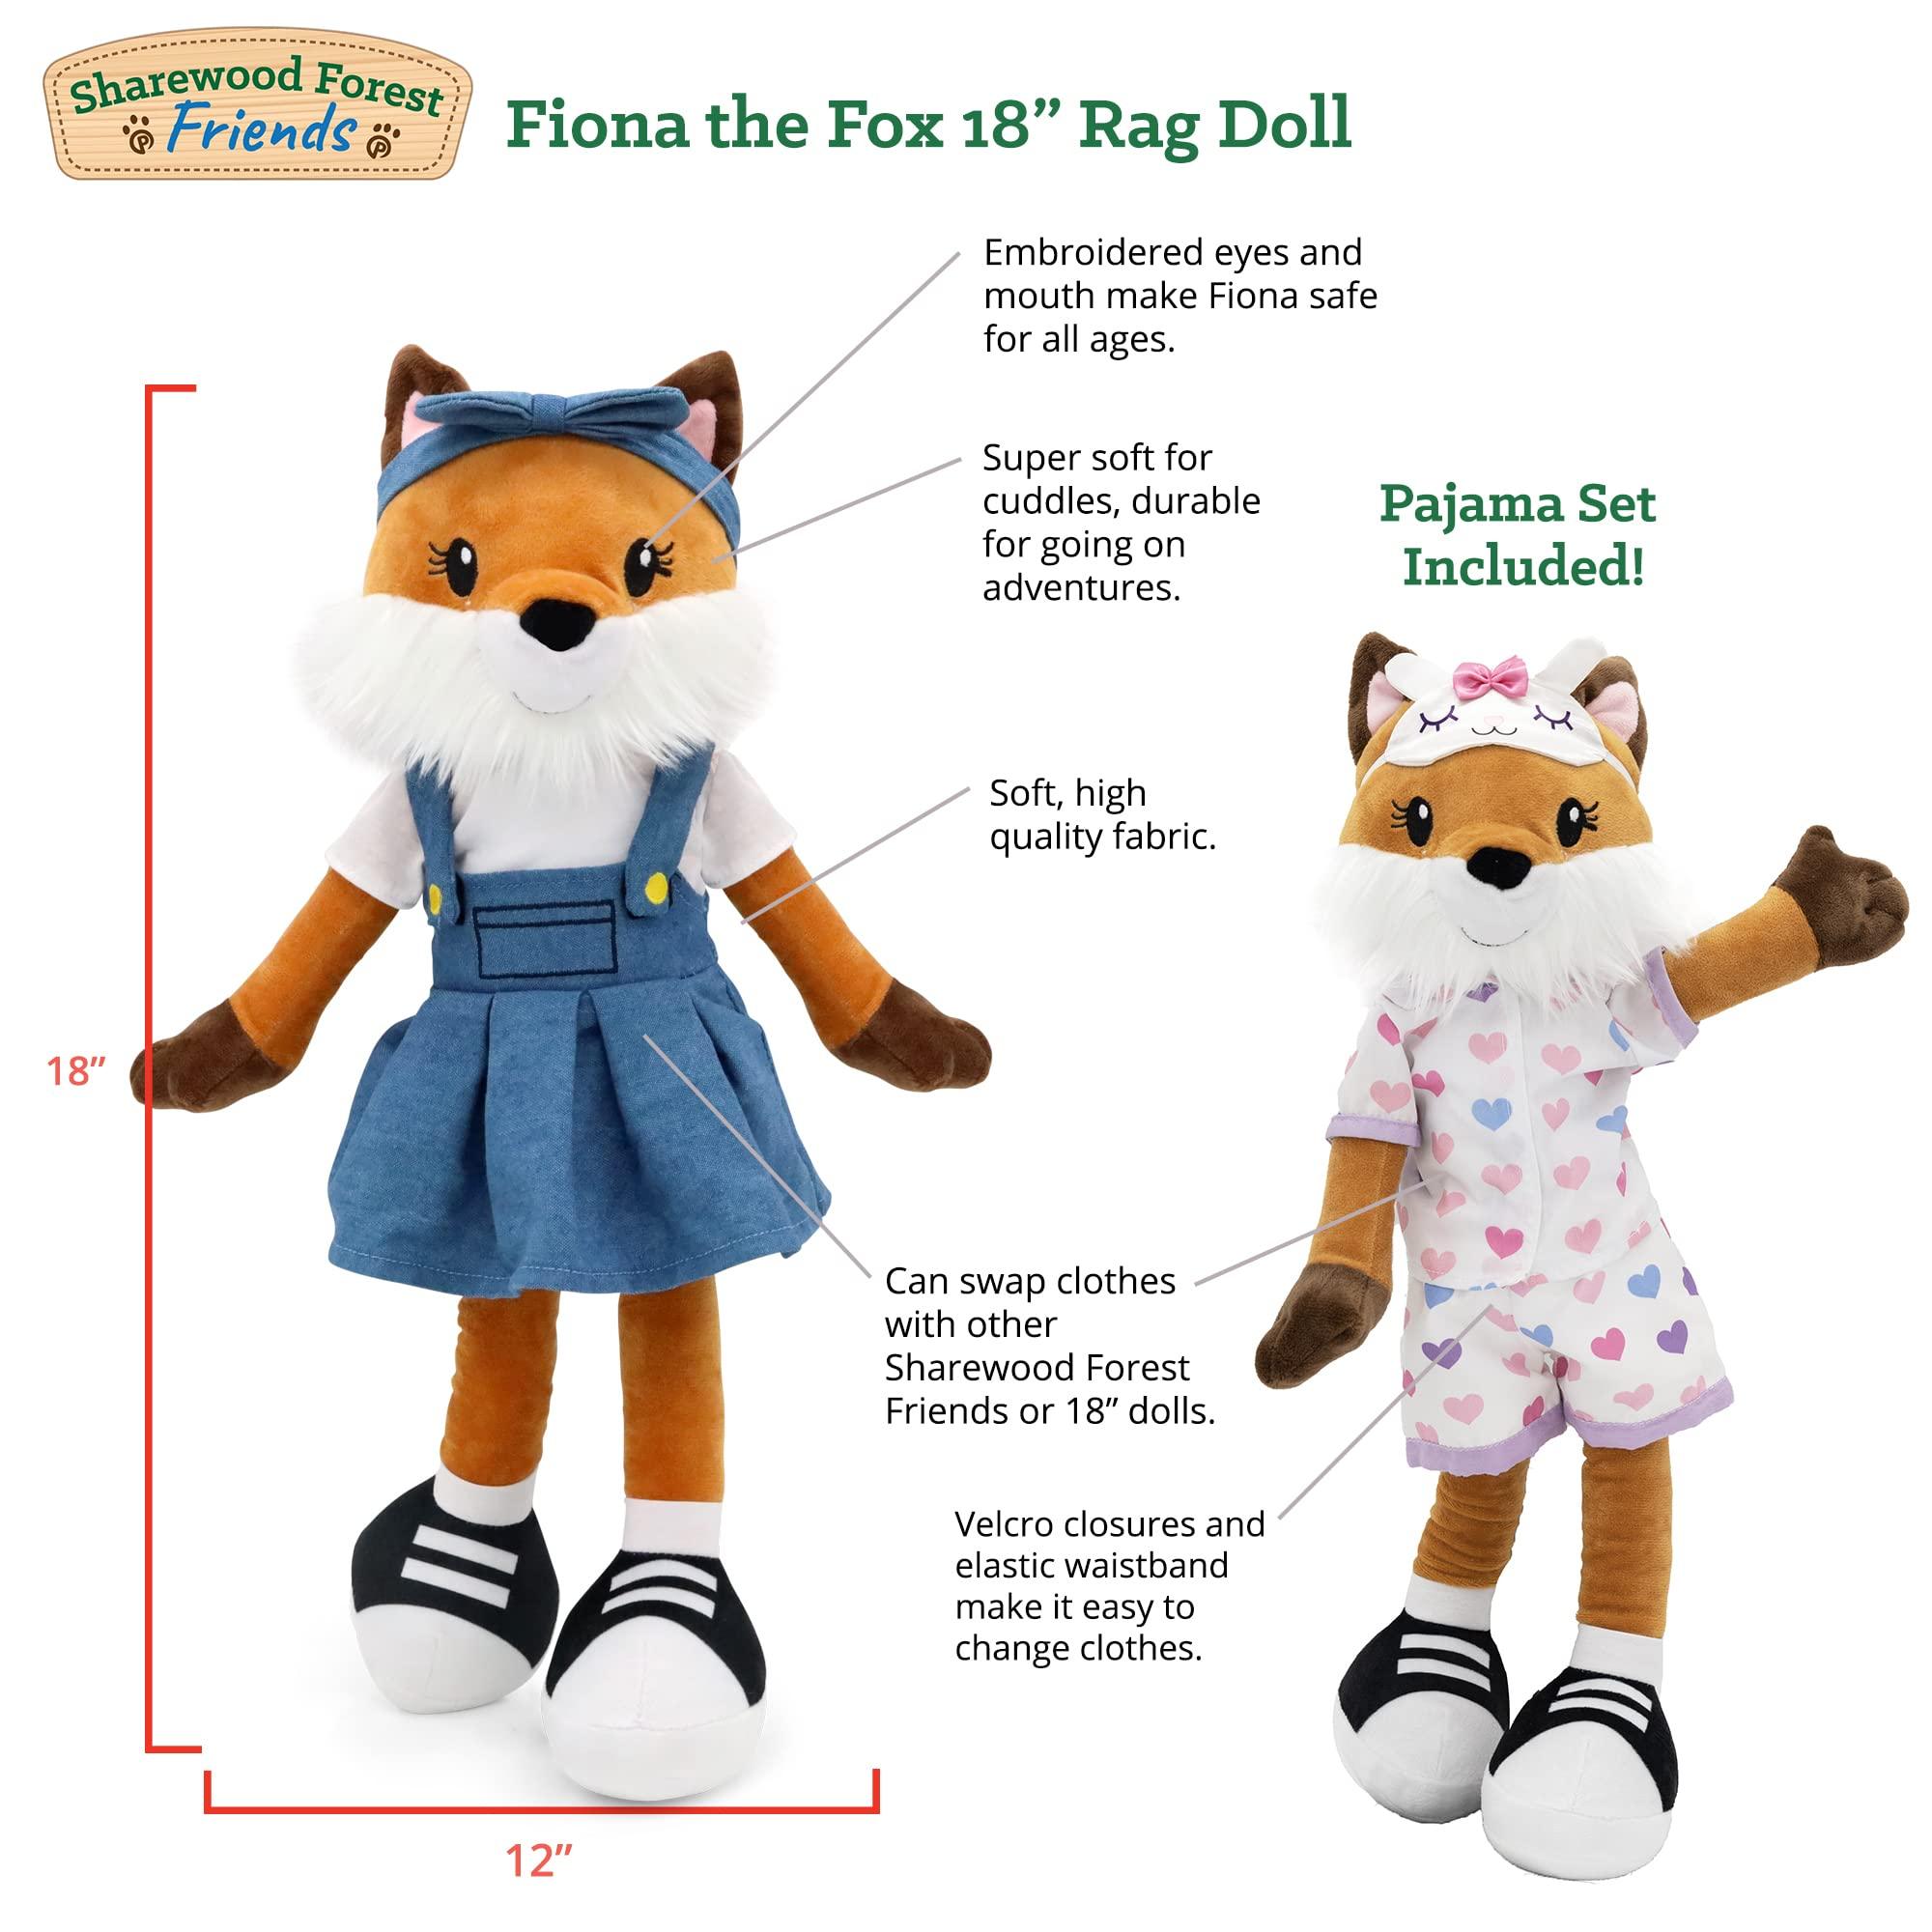 Sharewood Forest Friends 18 Inch Rag Doll Fiona the Fox - OrangeOnions Wholesale